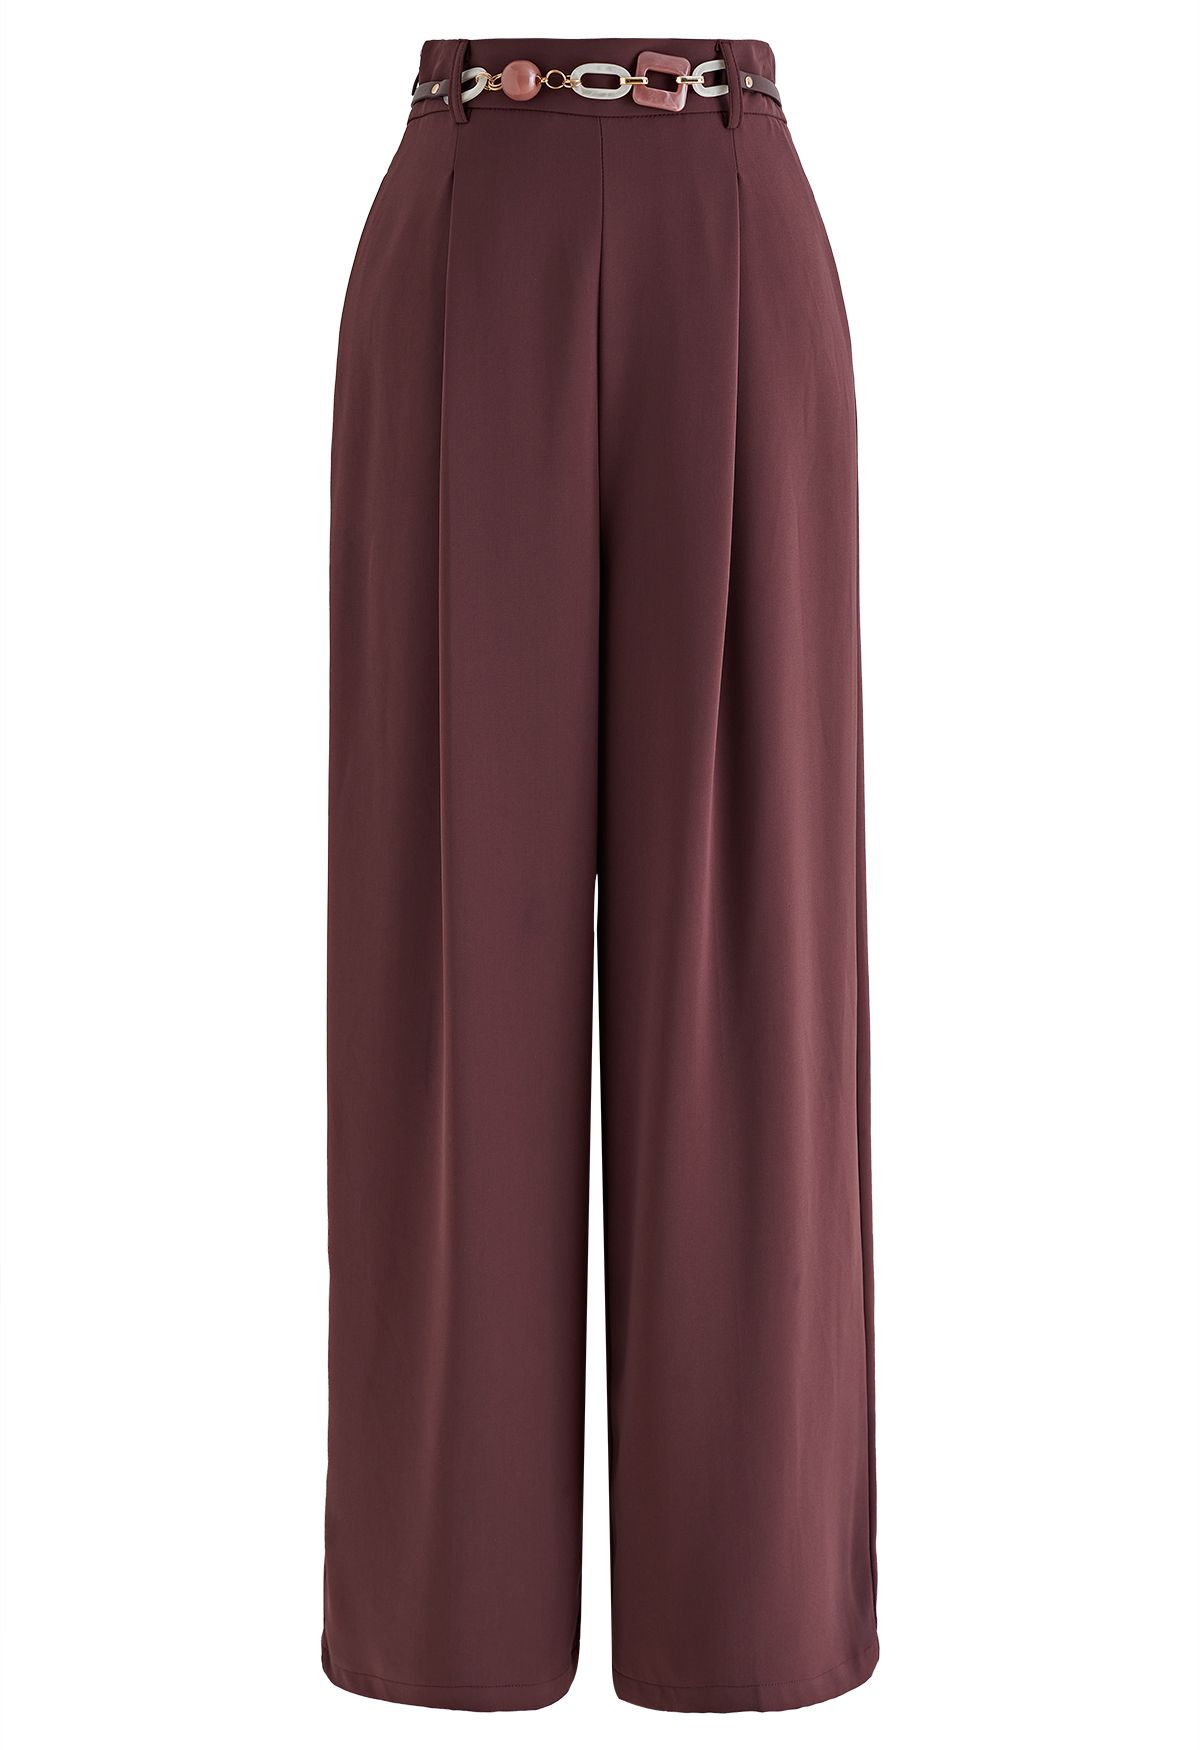 Pleat Front Wide-Leg Belted Pants in Berry - Retro, Indie and Unique ...